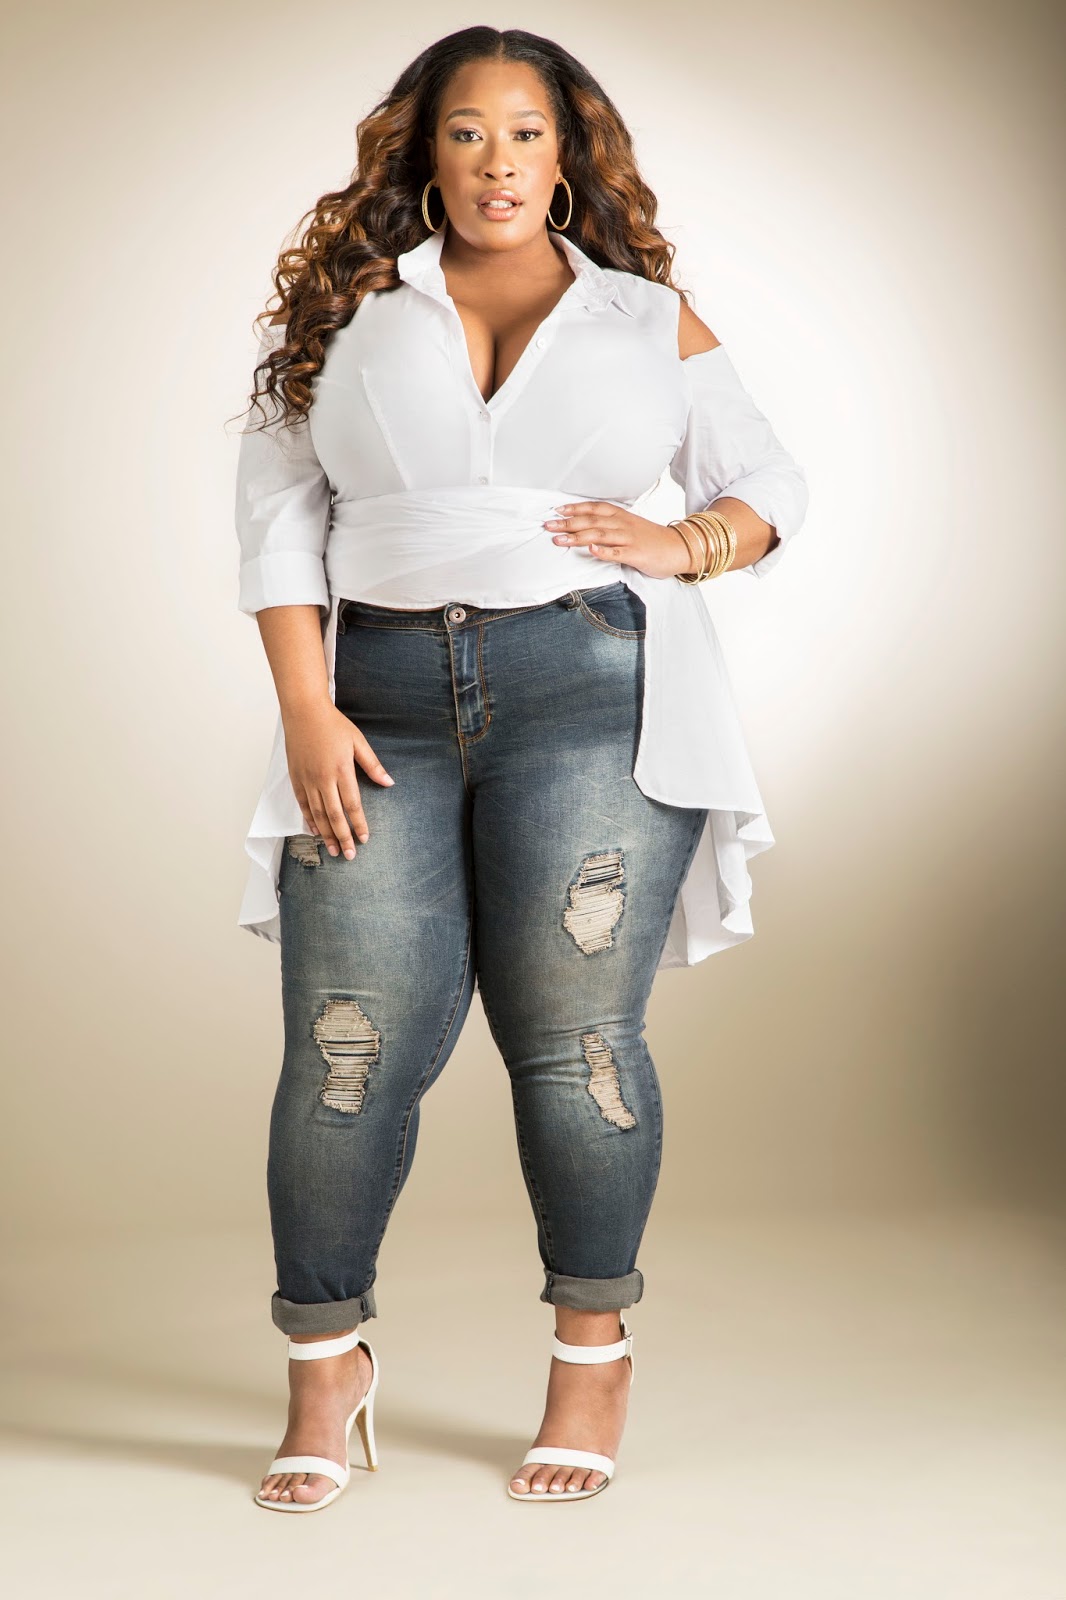 Plus Size Retailer Ashley Stewart Fall 2016 Extended Sizes Campaign